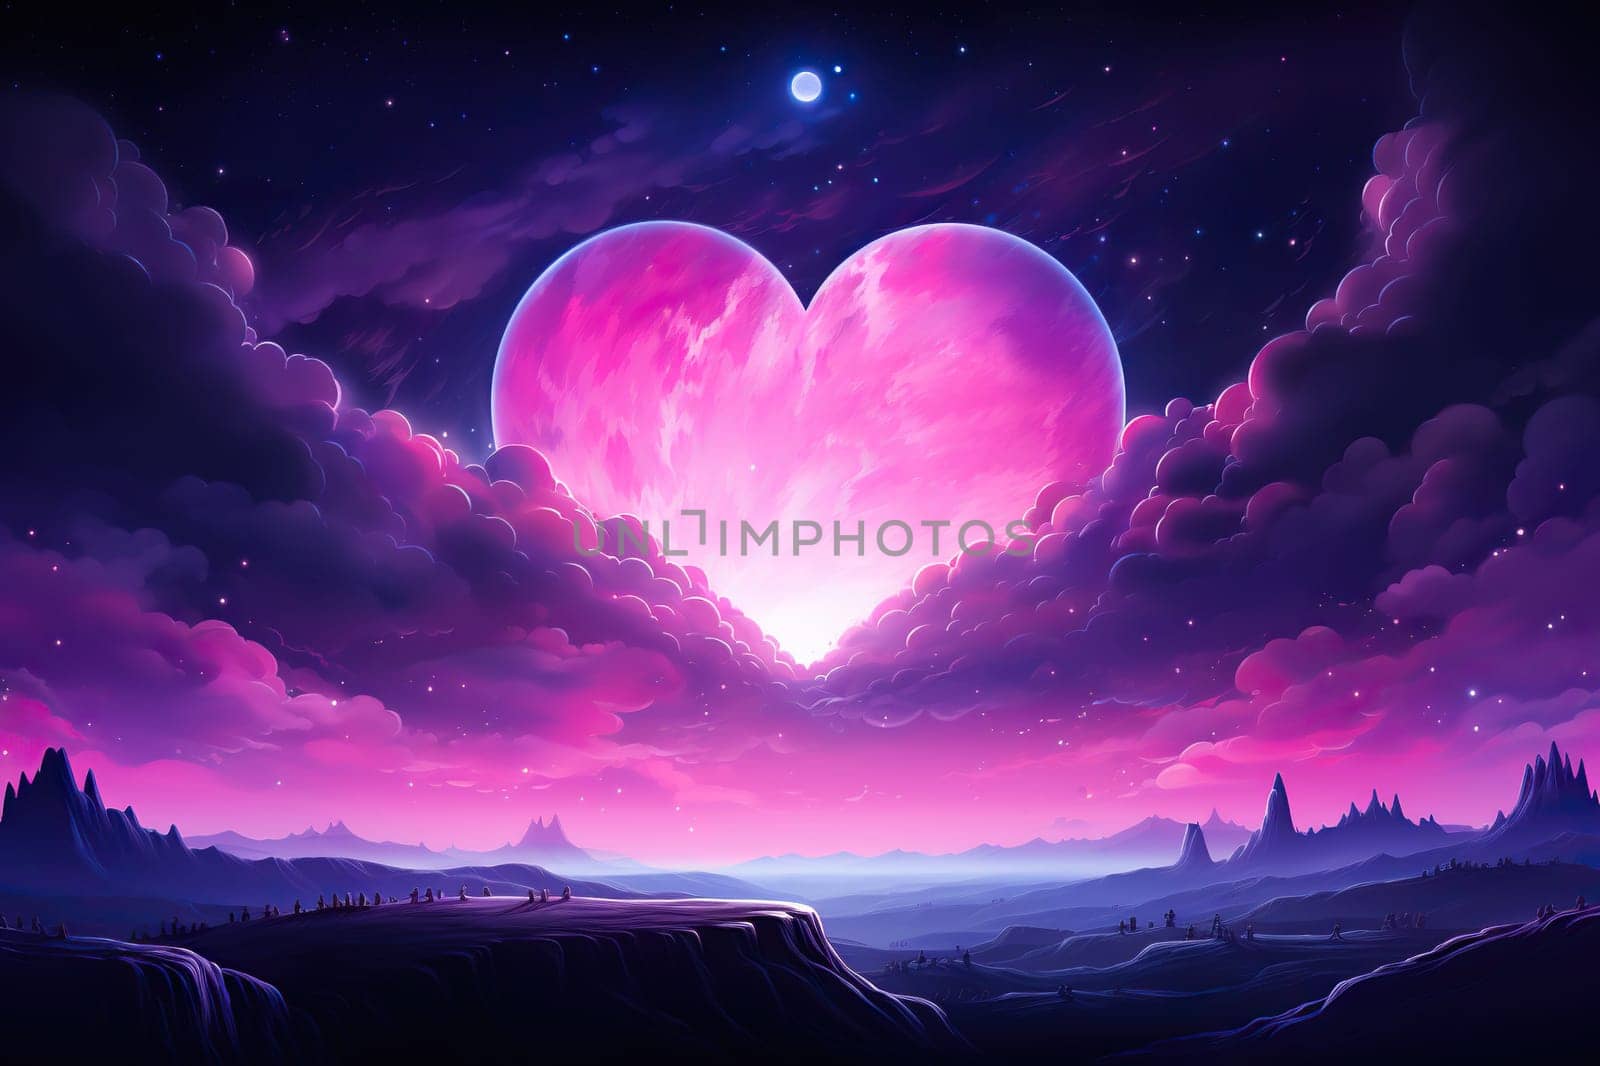 Huge pink heart in the night sky. Romantic illustration. Generated by artificial intelligence by Vovmar